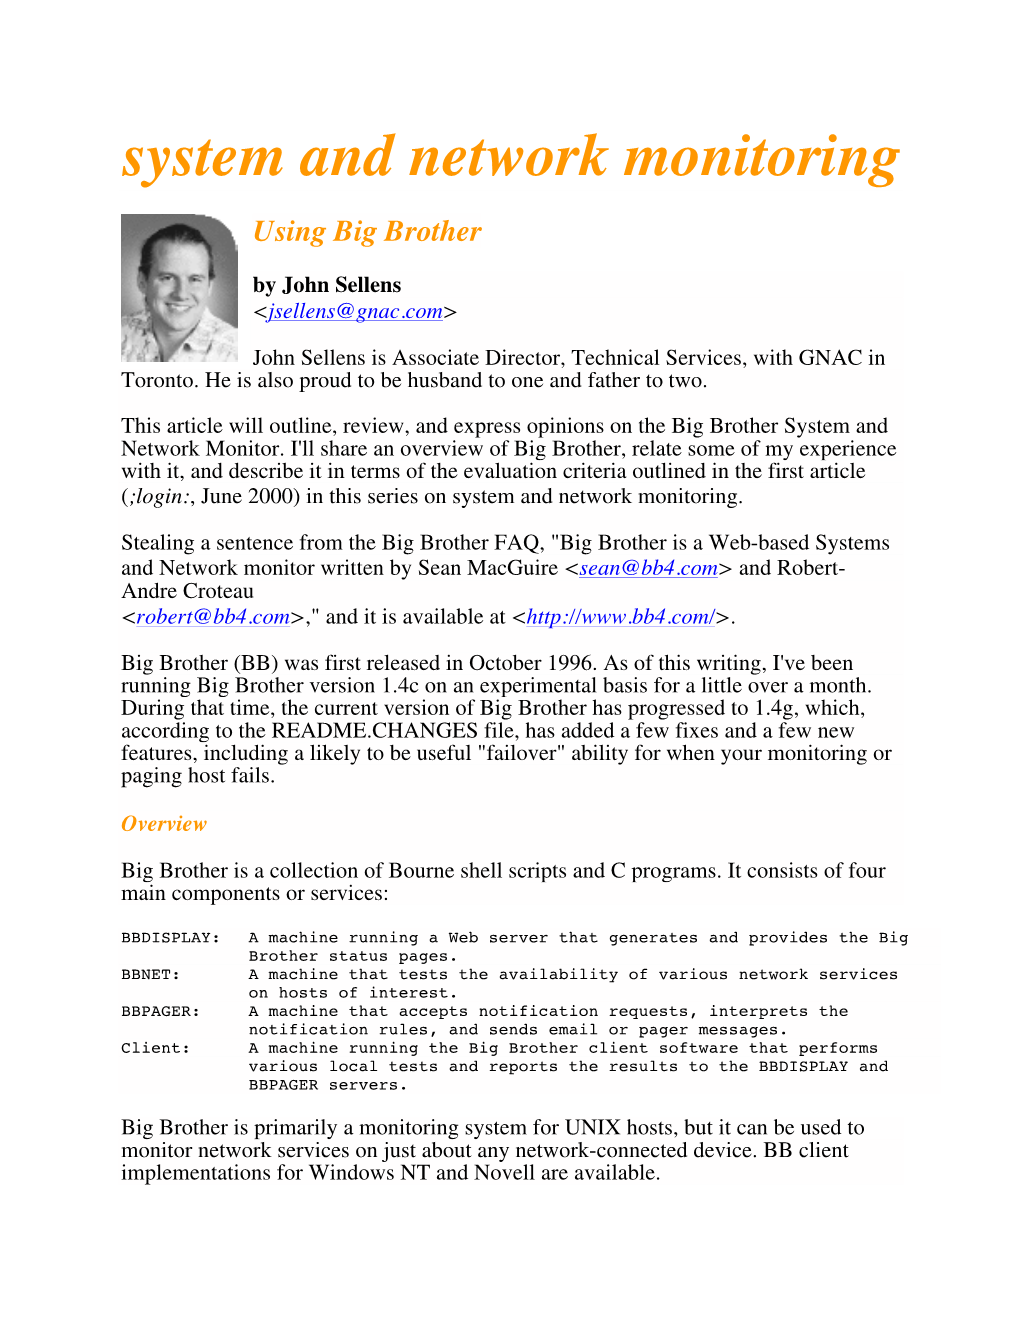 System and Network Monitoring